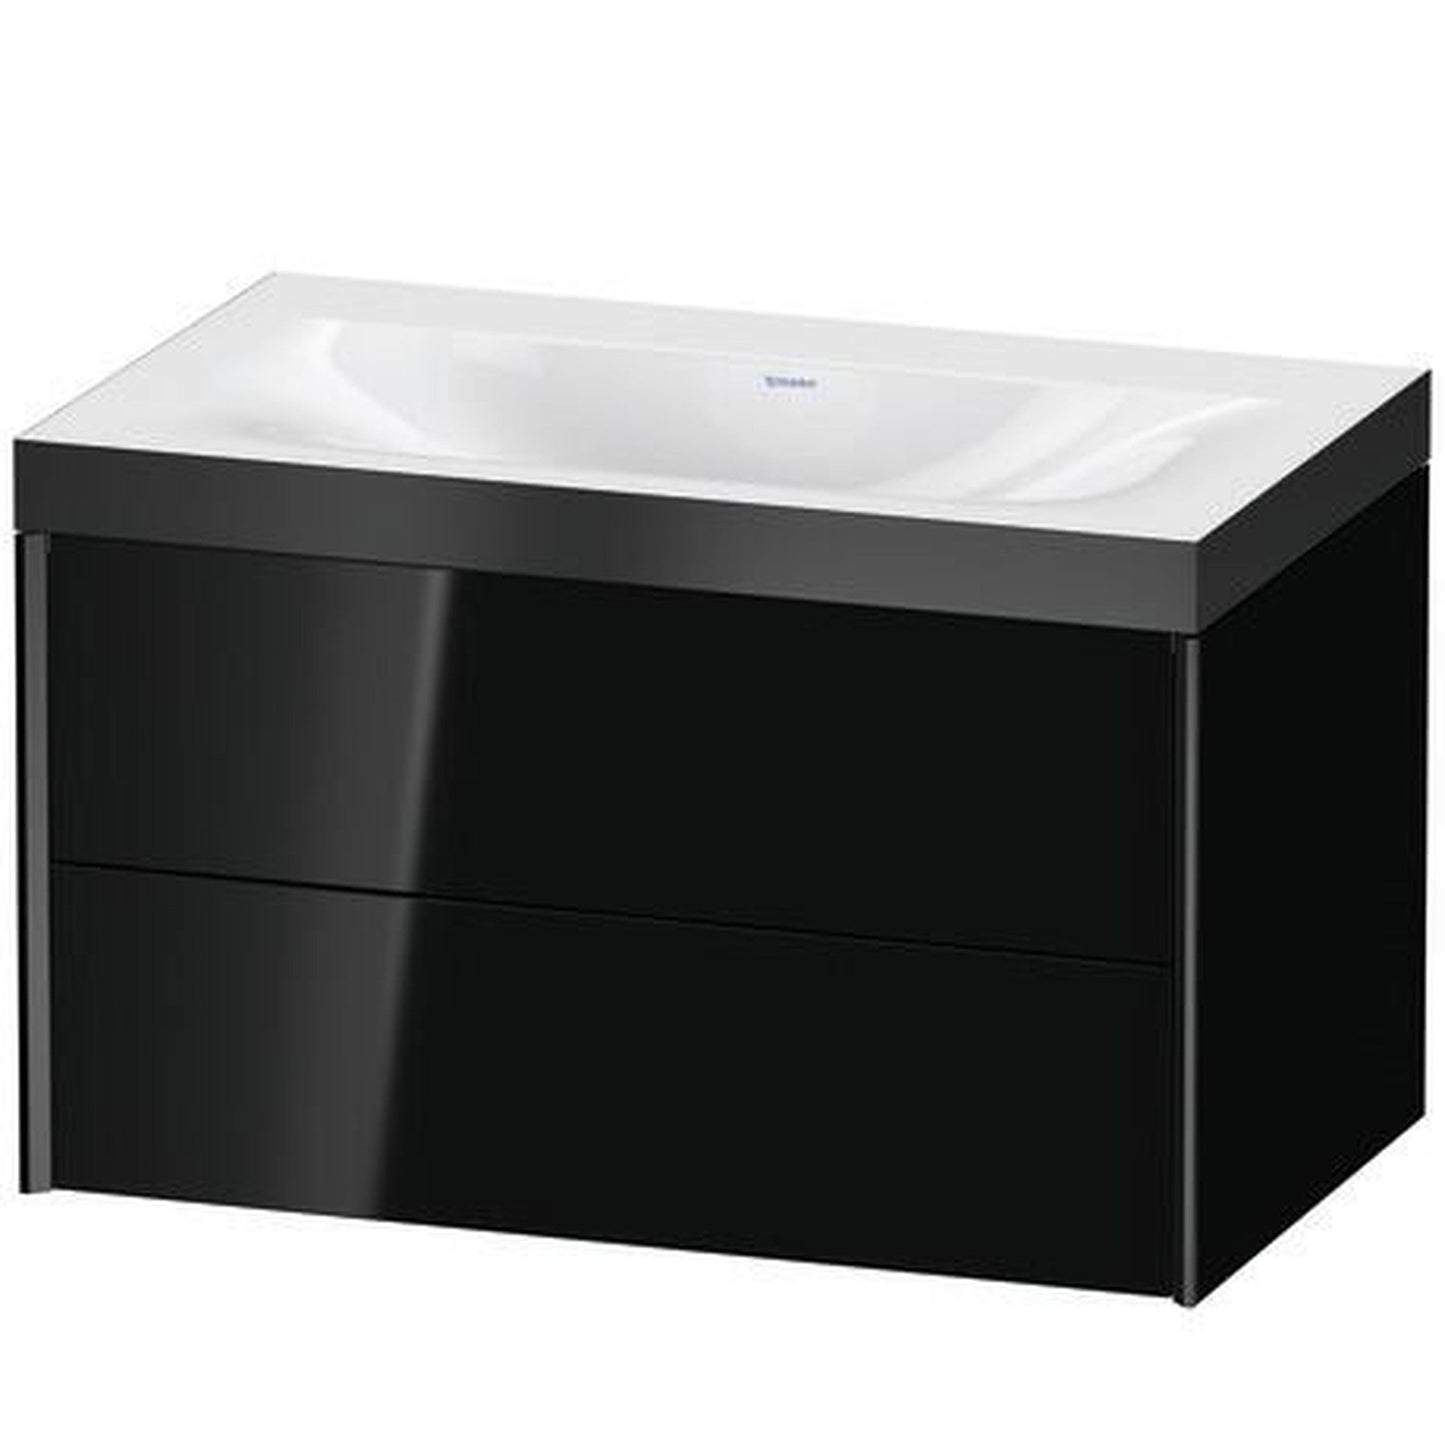 Duravit Xviu 31" x 20" x 19" Two Drawer C-Bonded Wall-Mount Vanity Kit Without Tap Hole, Black (XV4615NB240P)